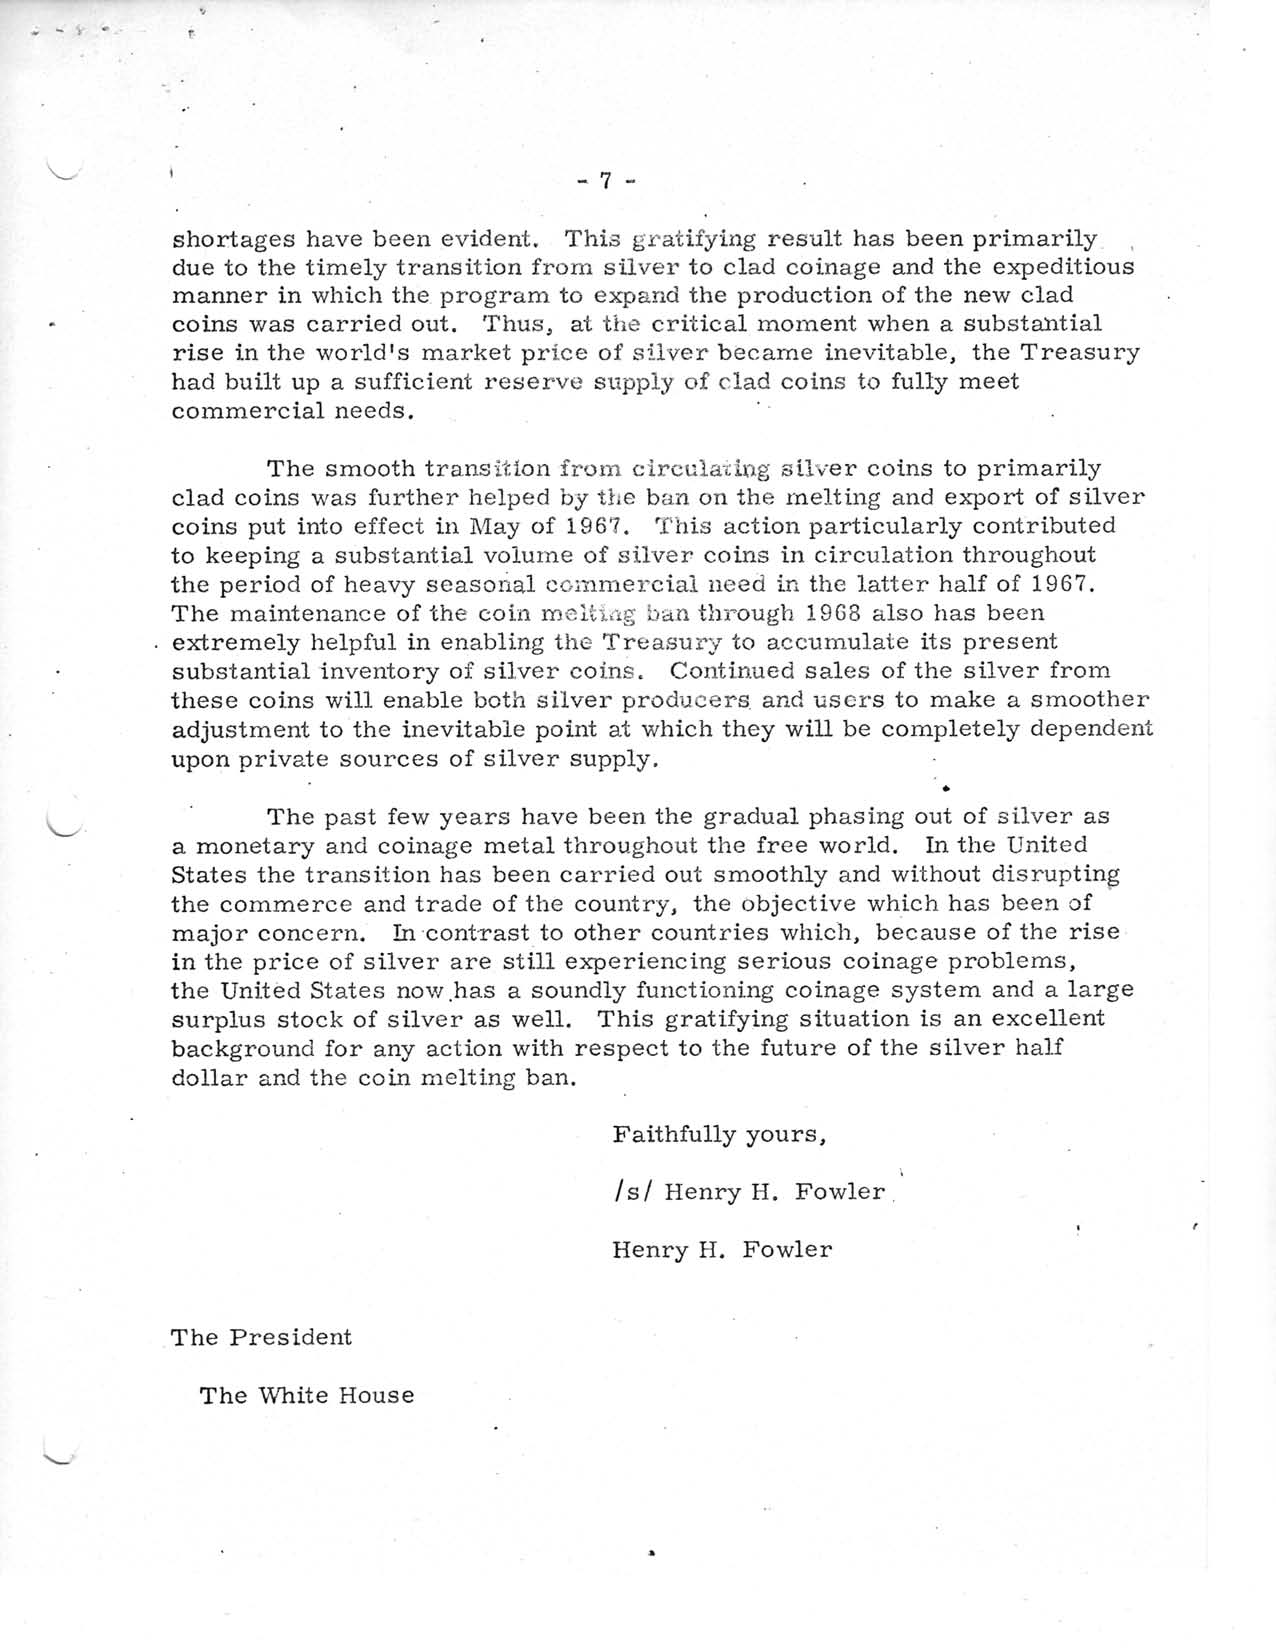 Historic Press Release: Letter to President From Treasury Secretary, Page 8